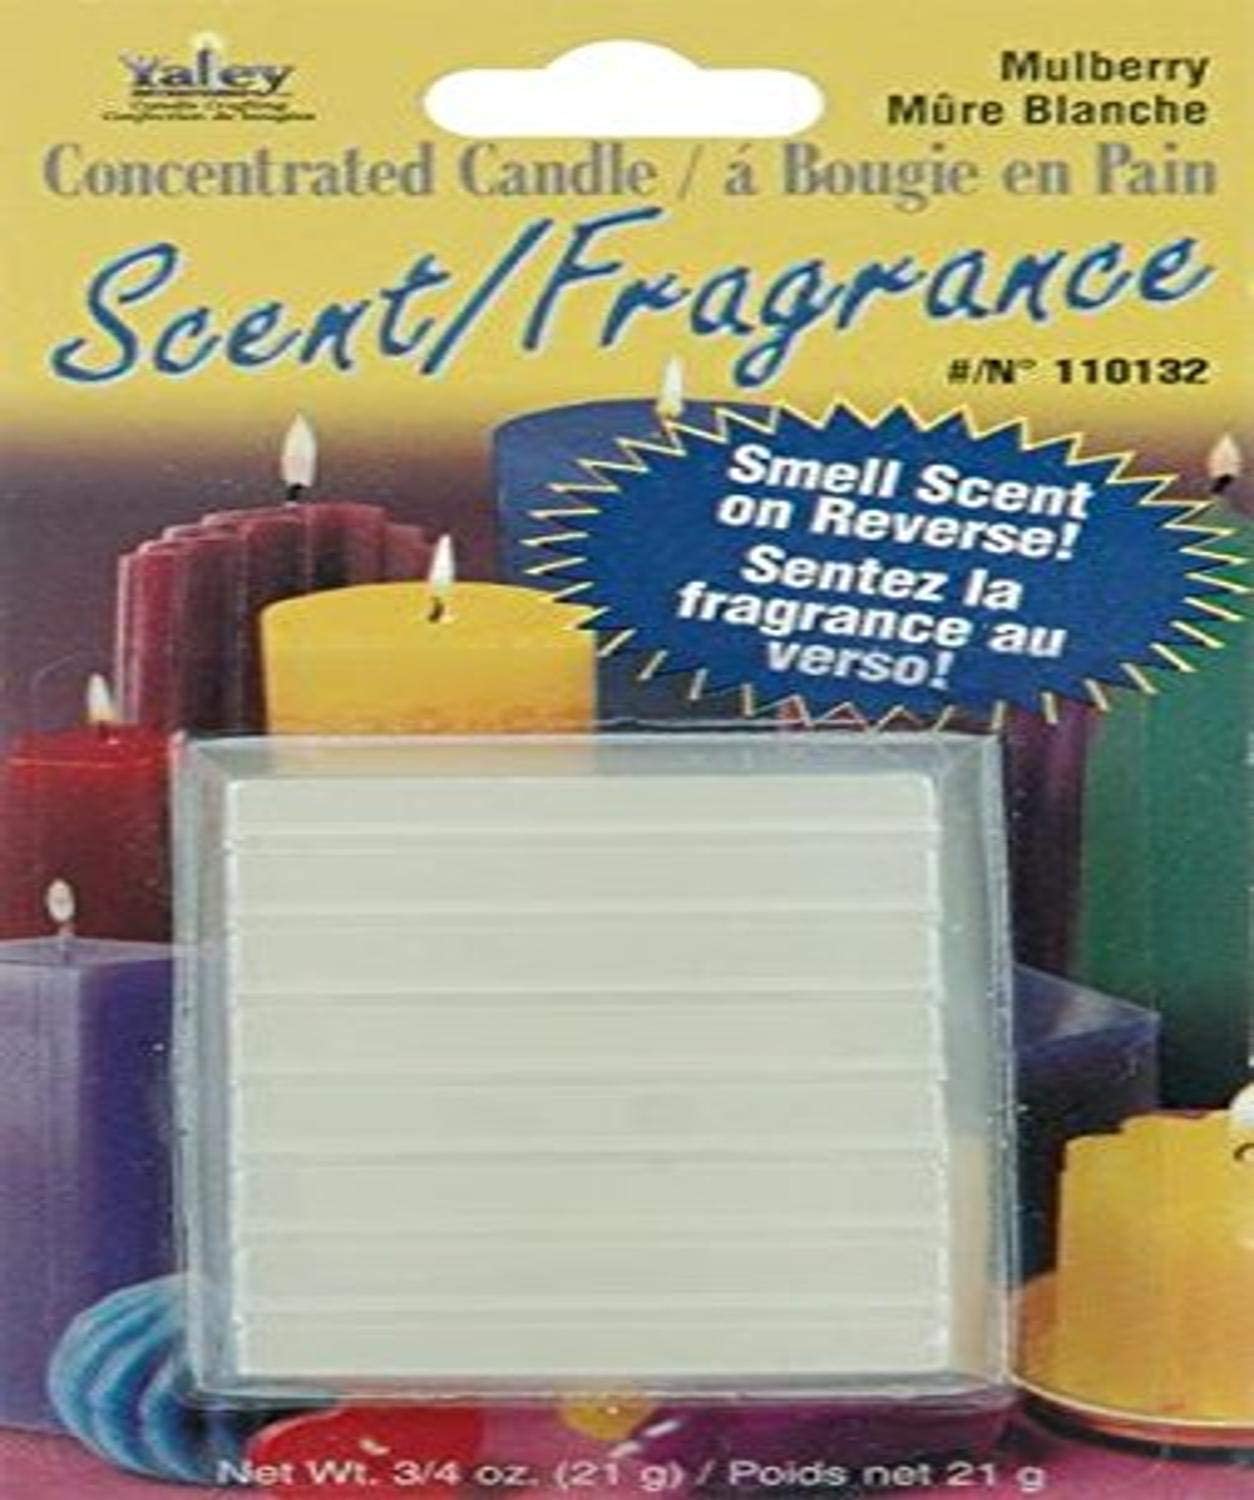 Yaley Concentrated Candle Scent Blocks, 0.75-Ounce, Mu-Pounderry